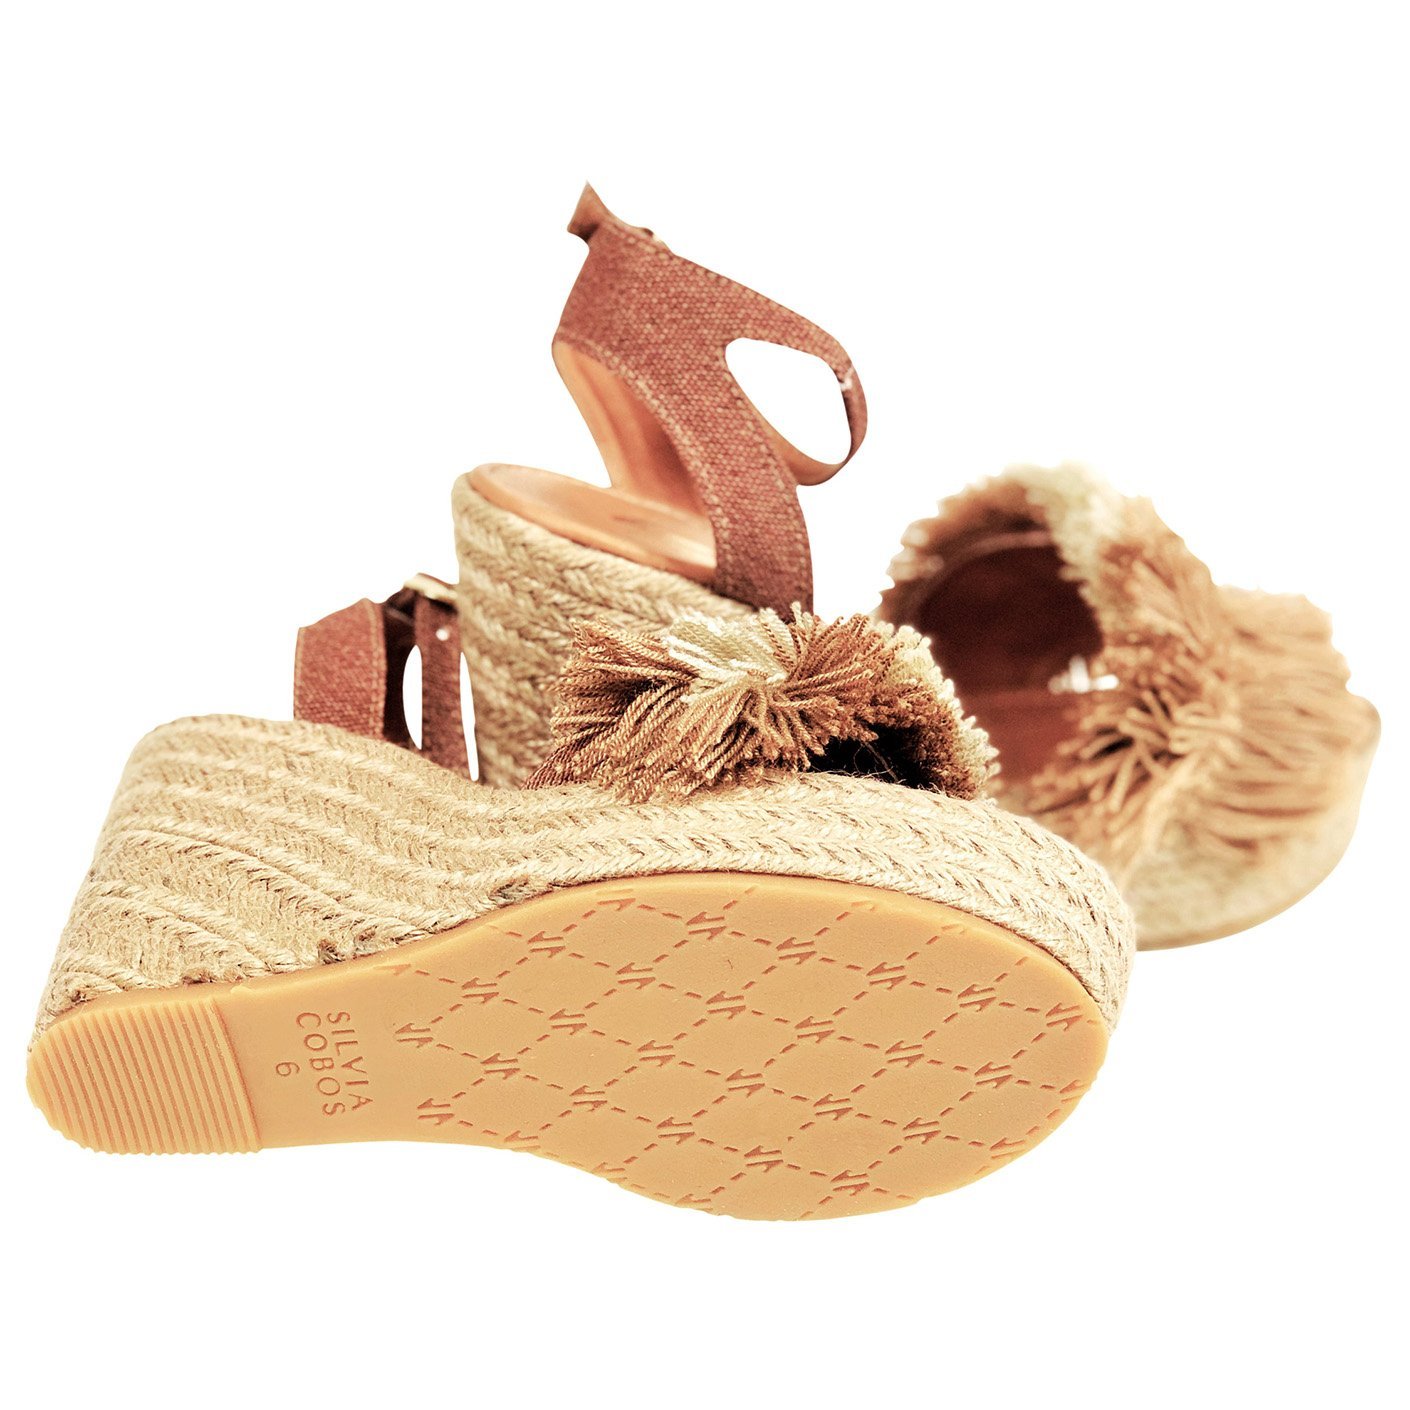 Silvia Cobos MAMBO Ankle Strap Wedges in Beige